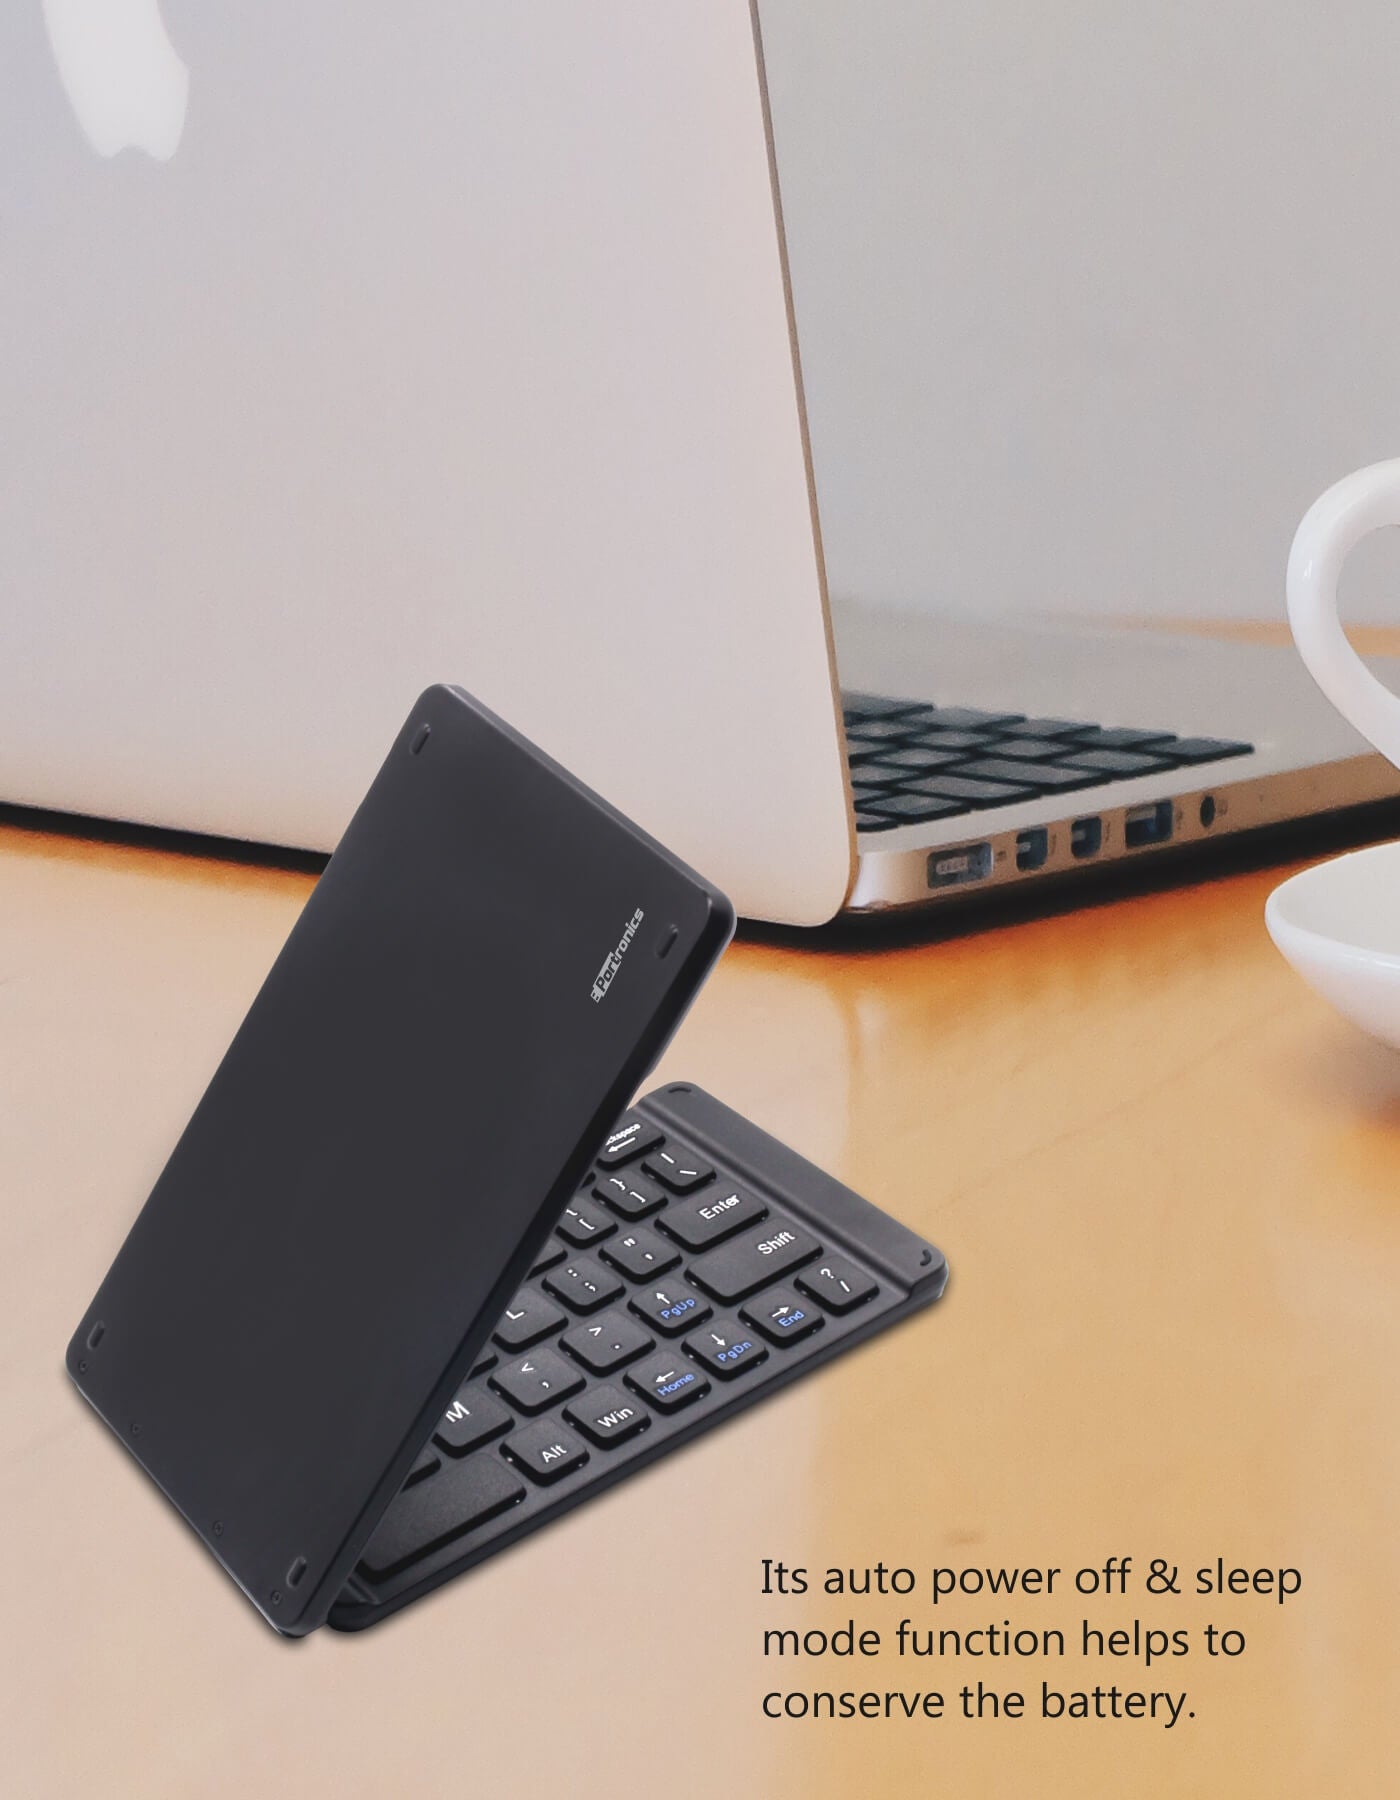 Portronics Chicklet Pocket Friendly Wireless Keyboard price is very low